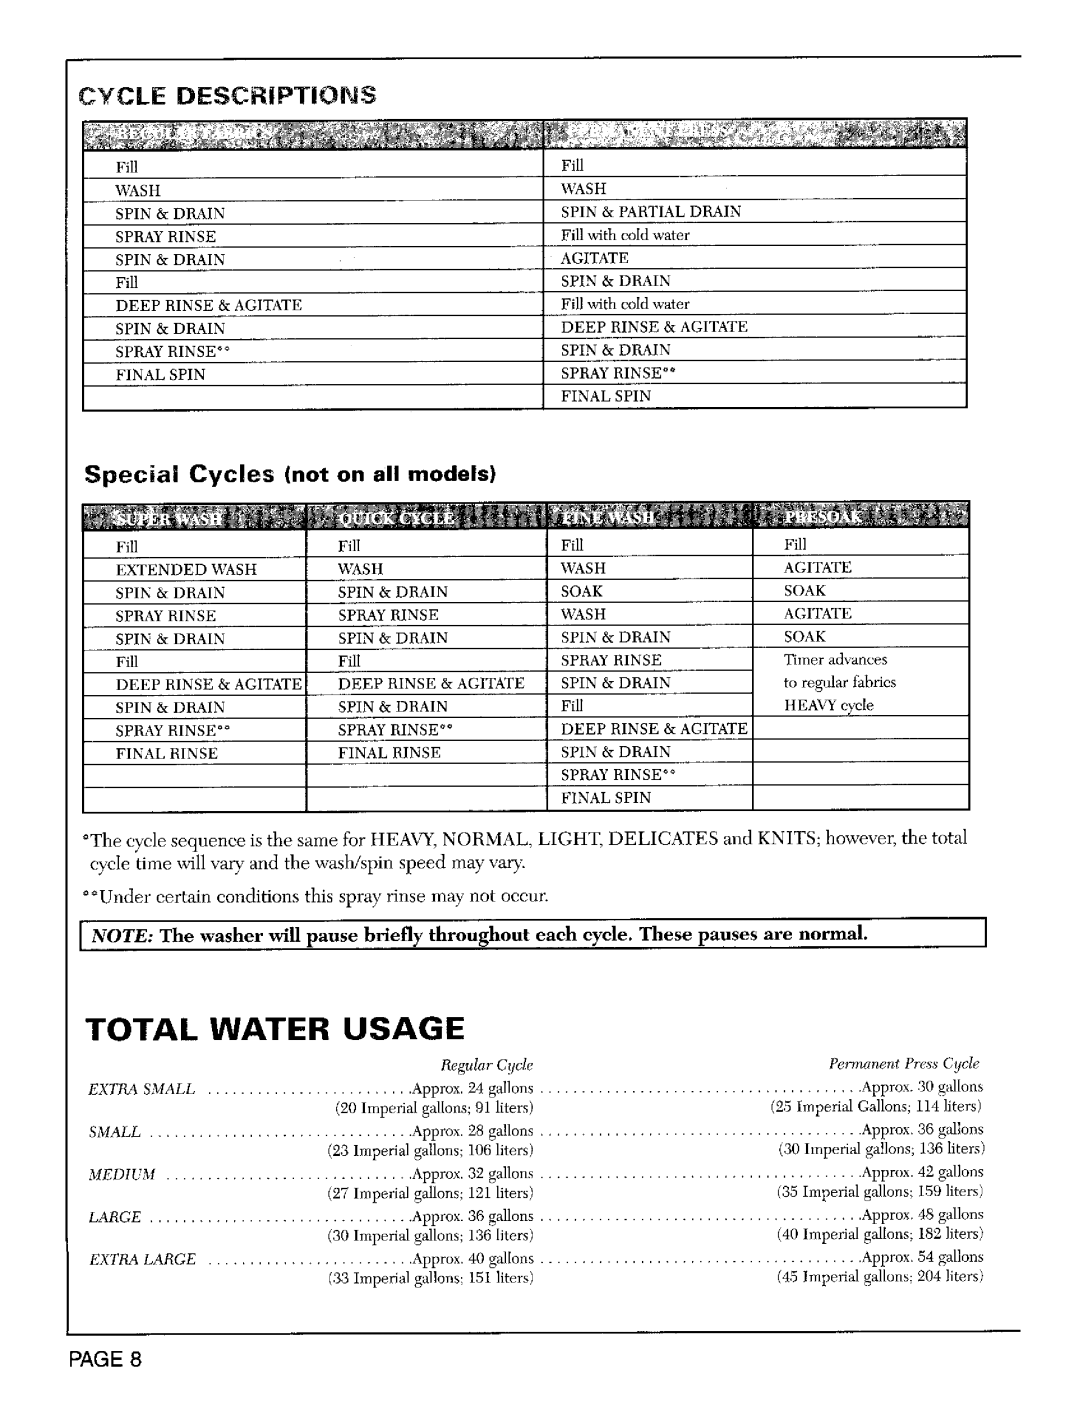 Maytag LAT8904, LAT9824, LAT9804, LAT6914 Special Cycles not on all models, PAGE8, Total, Water, Usage, Descriptions 